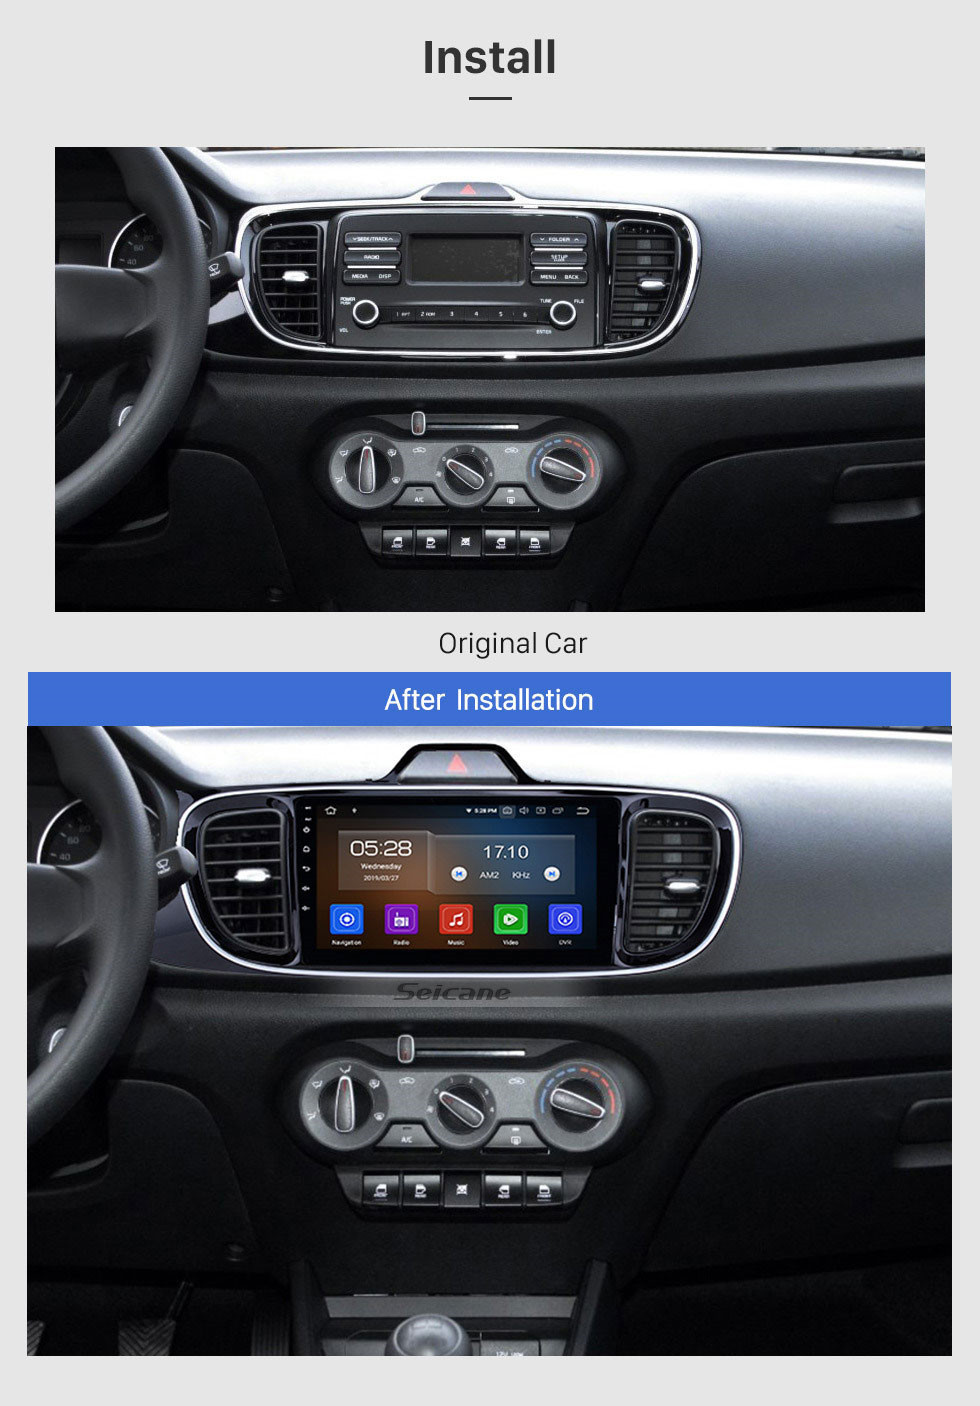 Seicane Android 11.0 9 inch Radio 1024*600 Touchscreen Bluetooth GPS Navi for 2017 KIA PEGAS LHD with Wifi music USB support DVD Carplay TPMS 4G 1080P Video